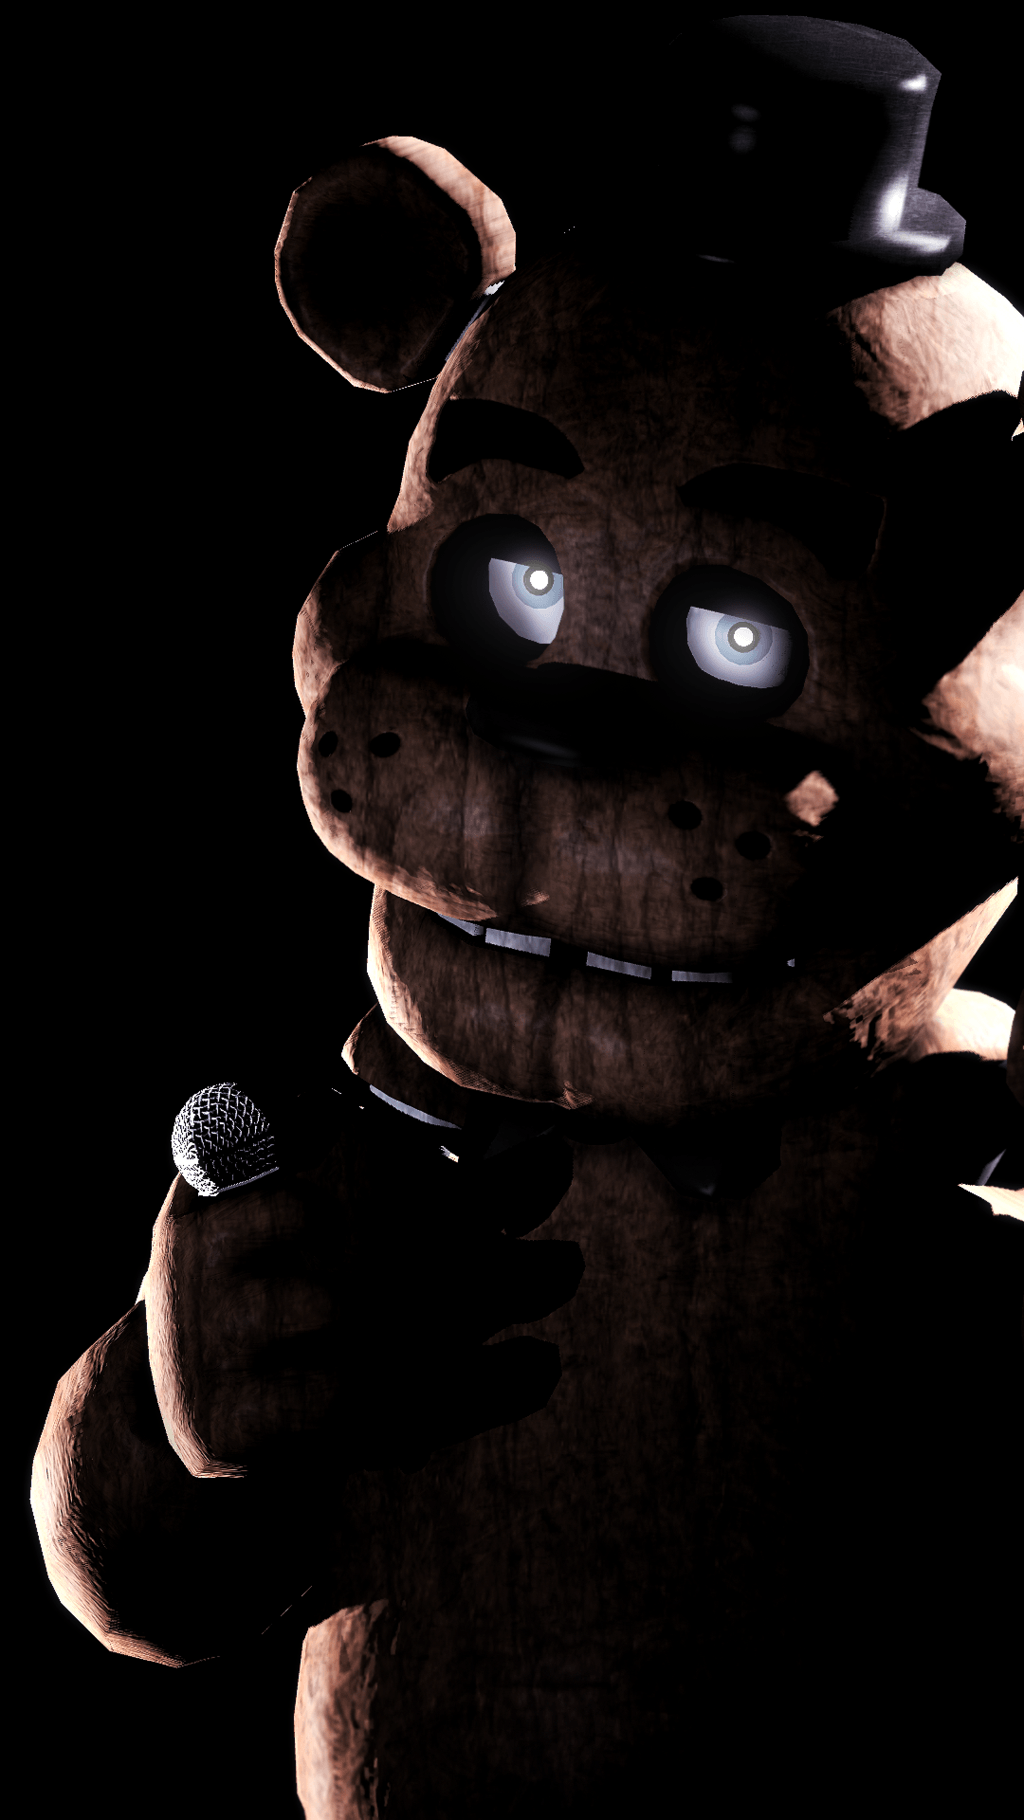 Funny Five Nights at Freddys Wallpapers on WallpaperDog